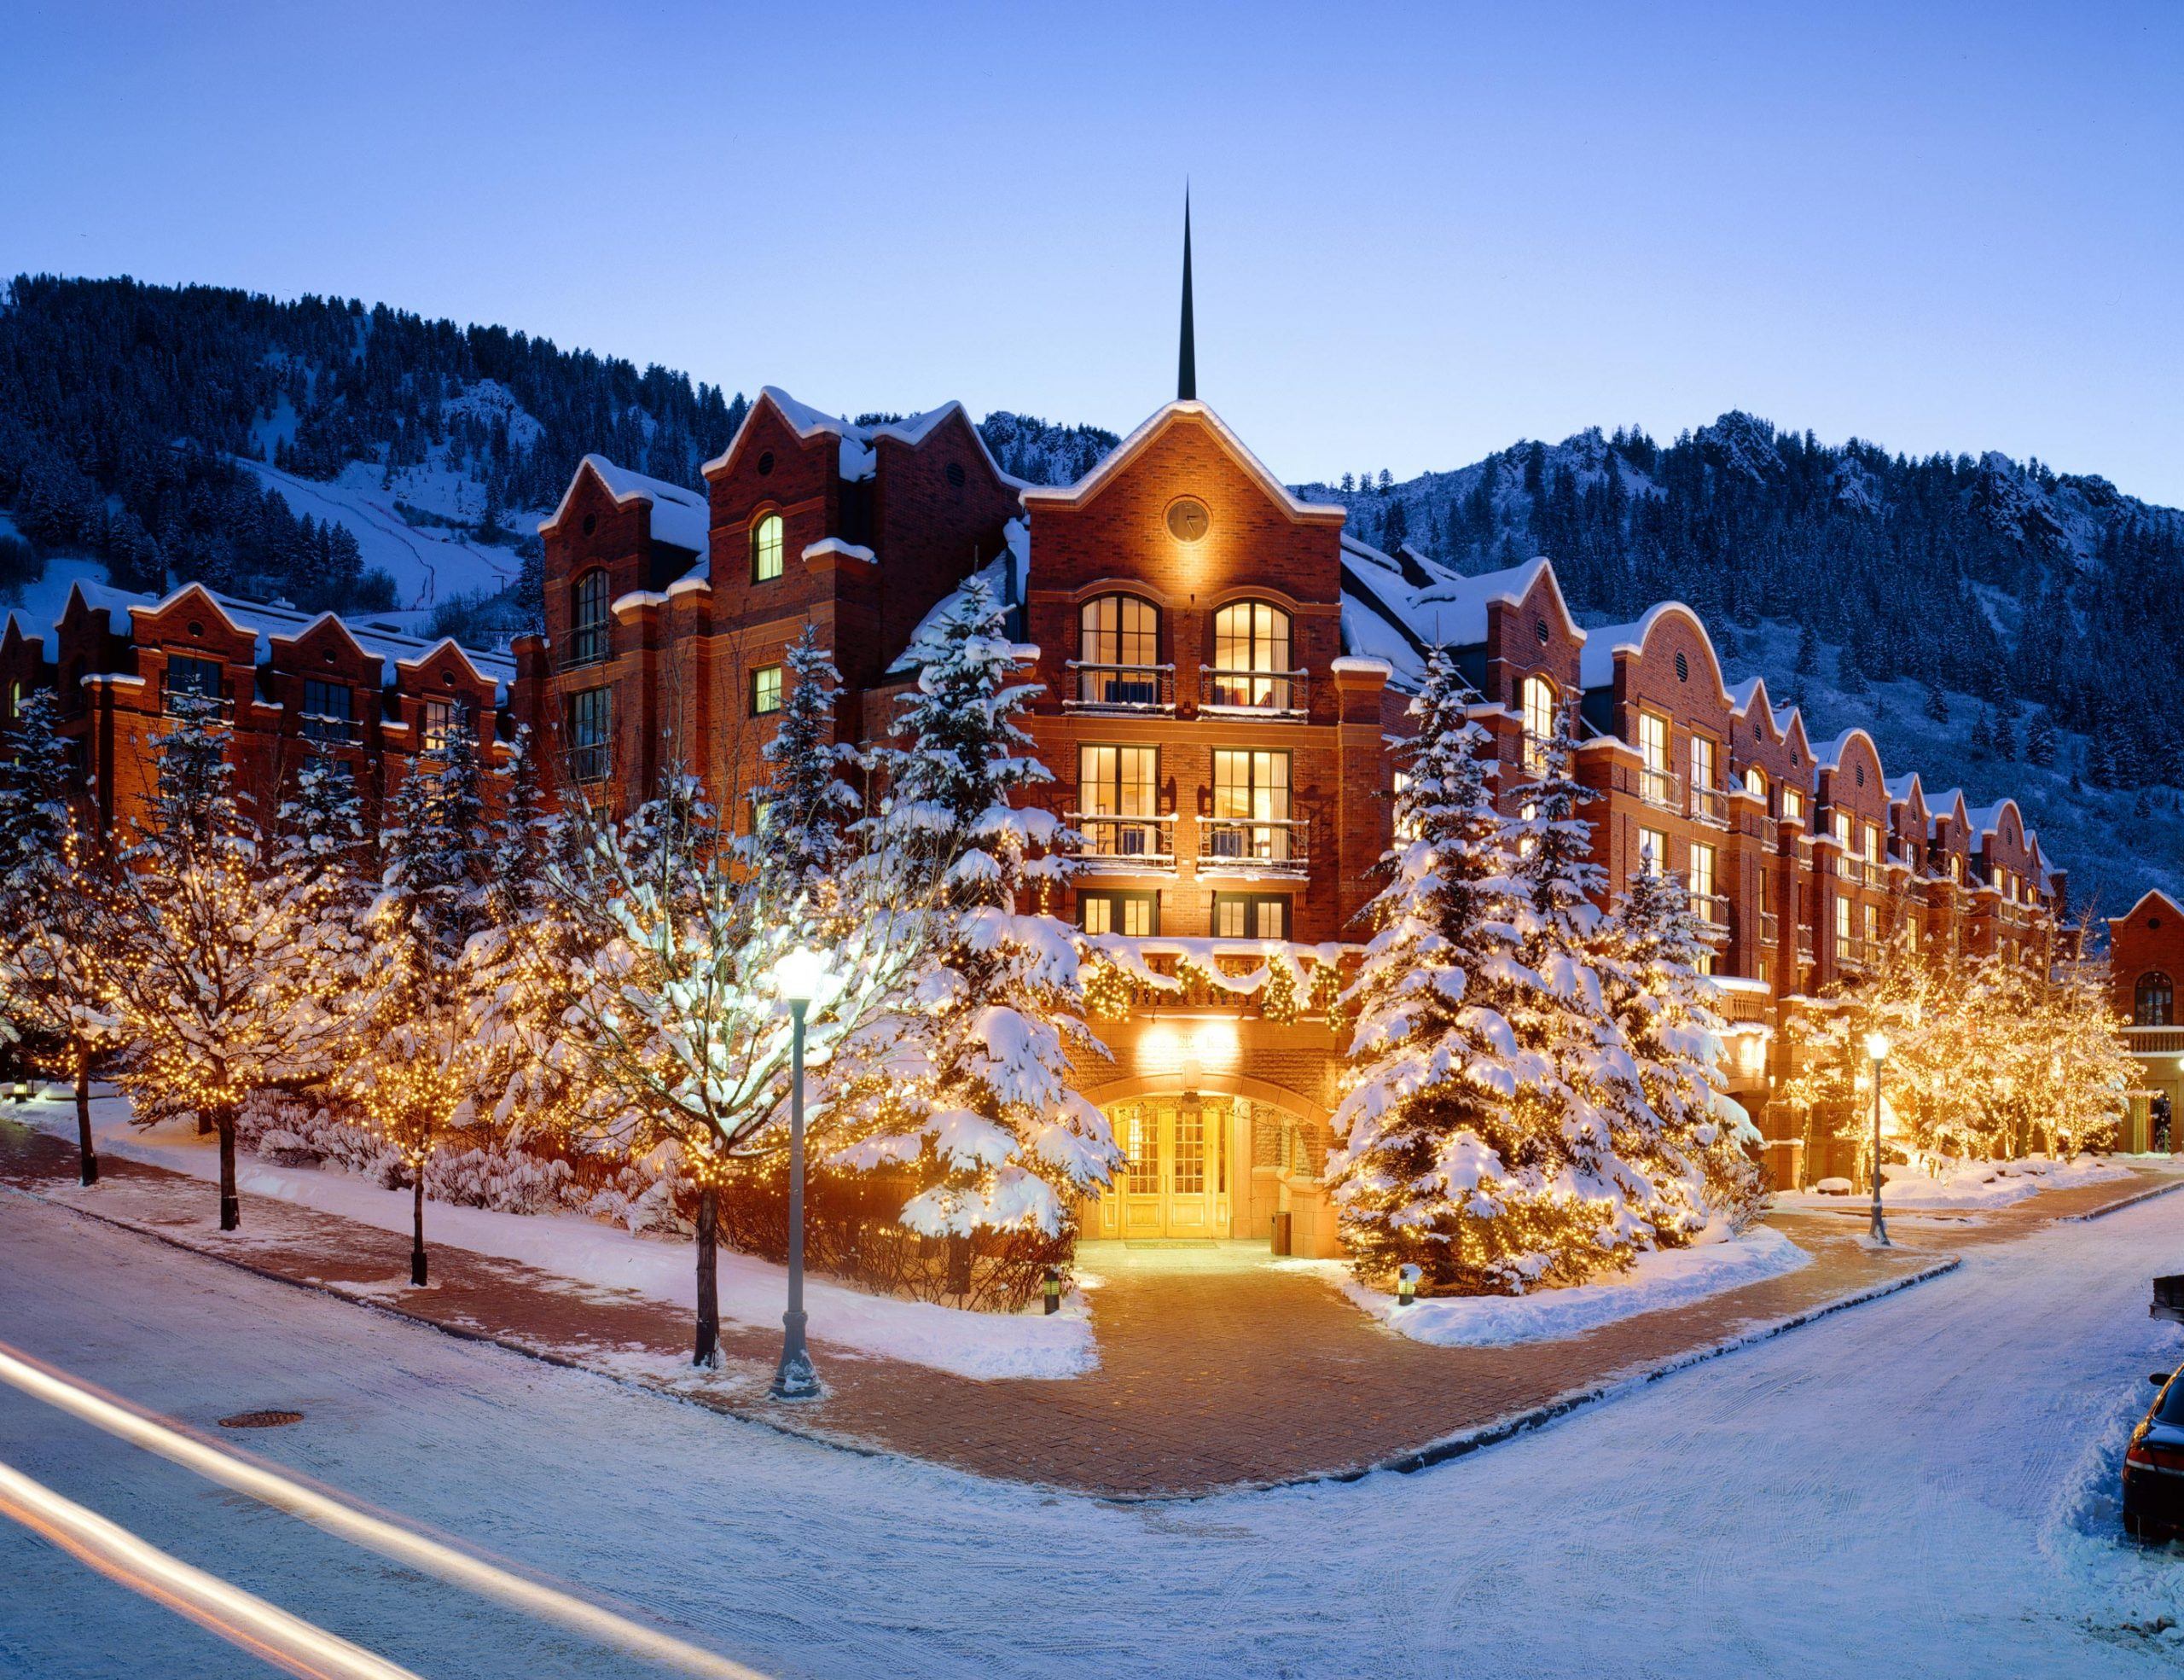 New York-based Elevated Returns is selling portions of the St Regis Aspen using blockchain in the first investment test for 